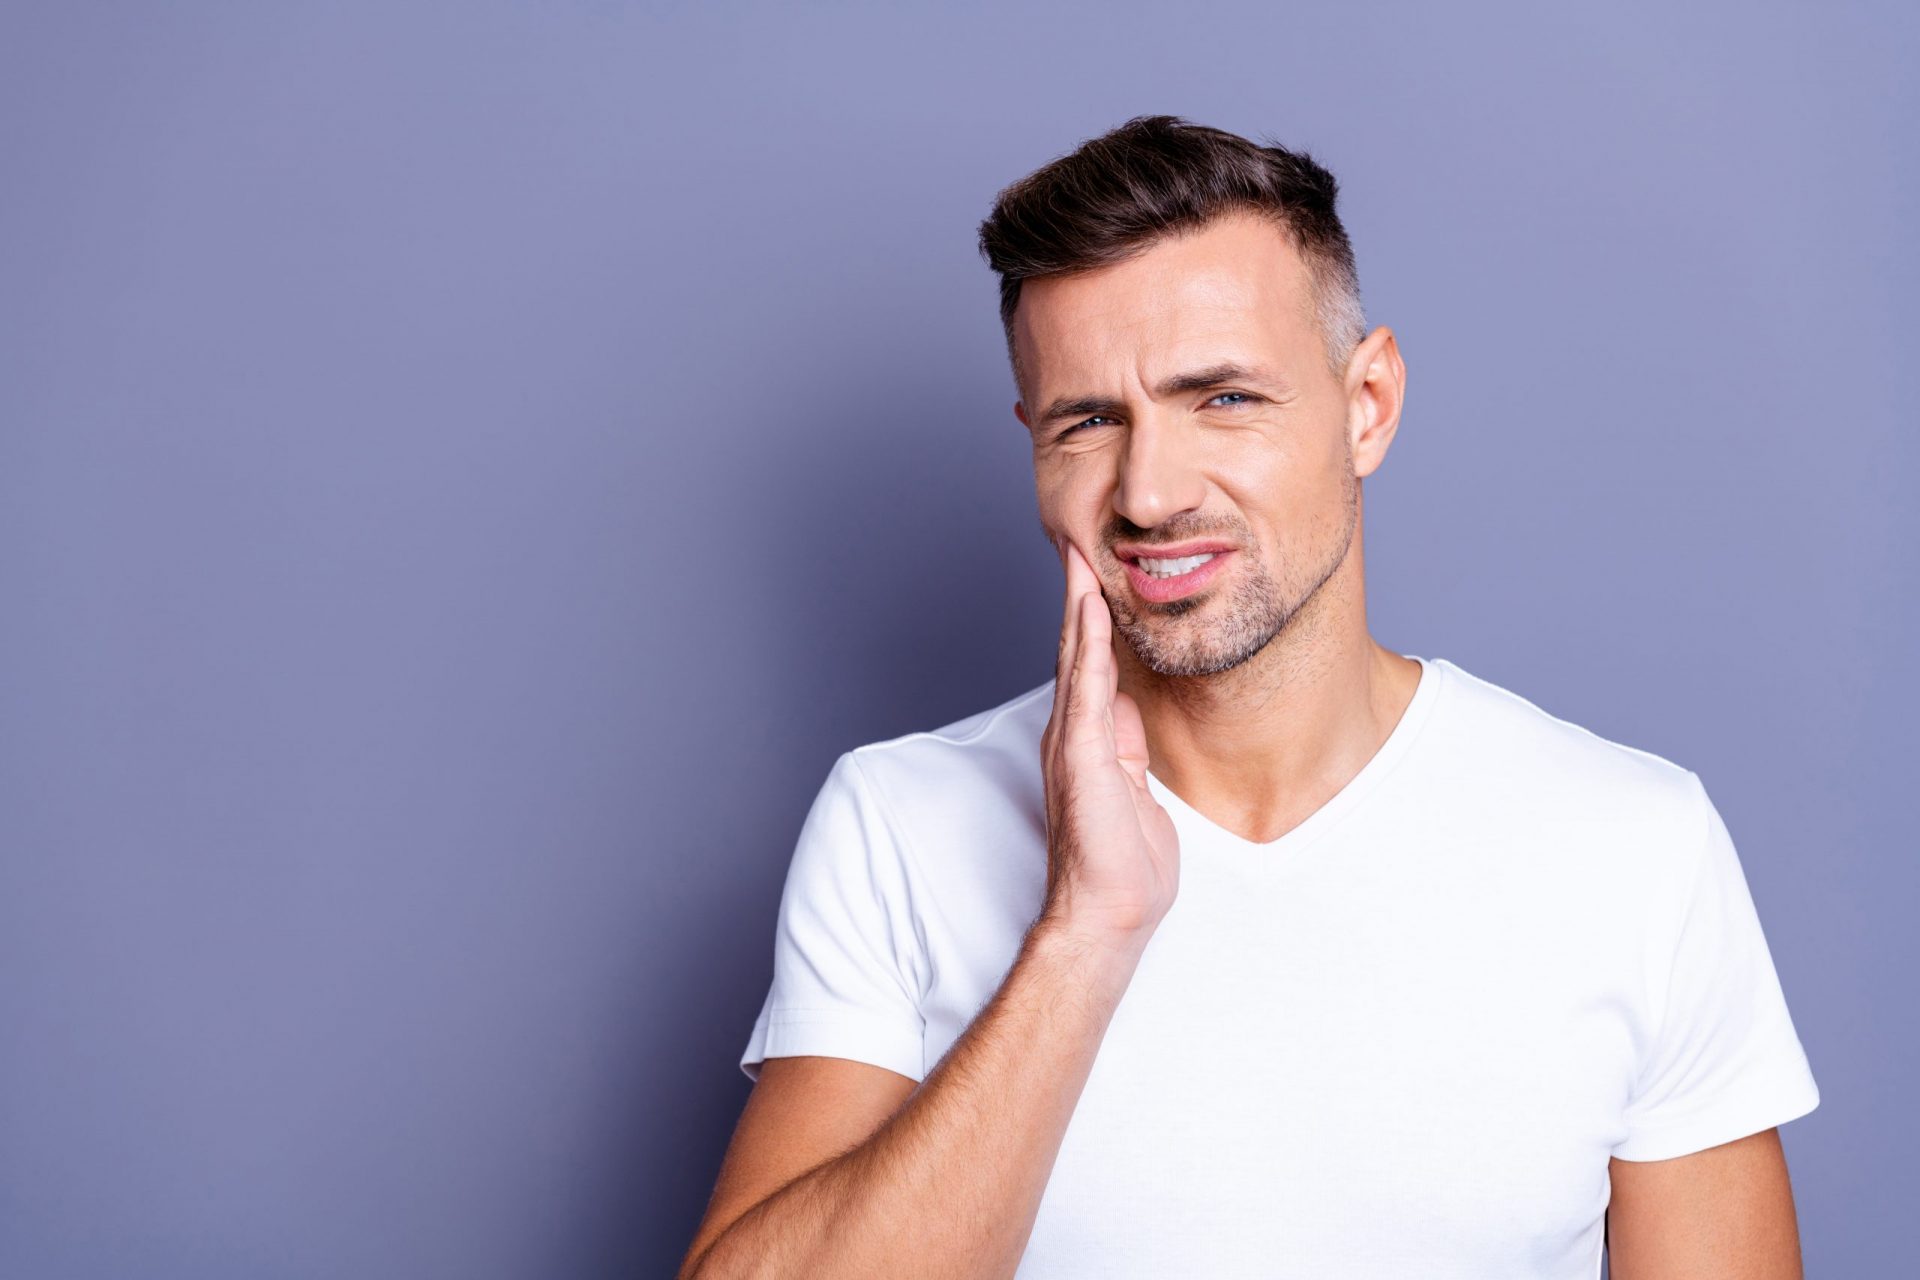 Man has jaw pain caused by malocclusion and is holding his cheek.